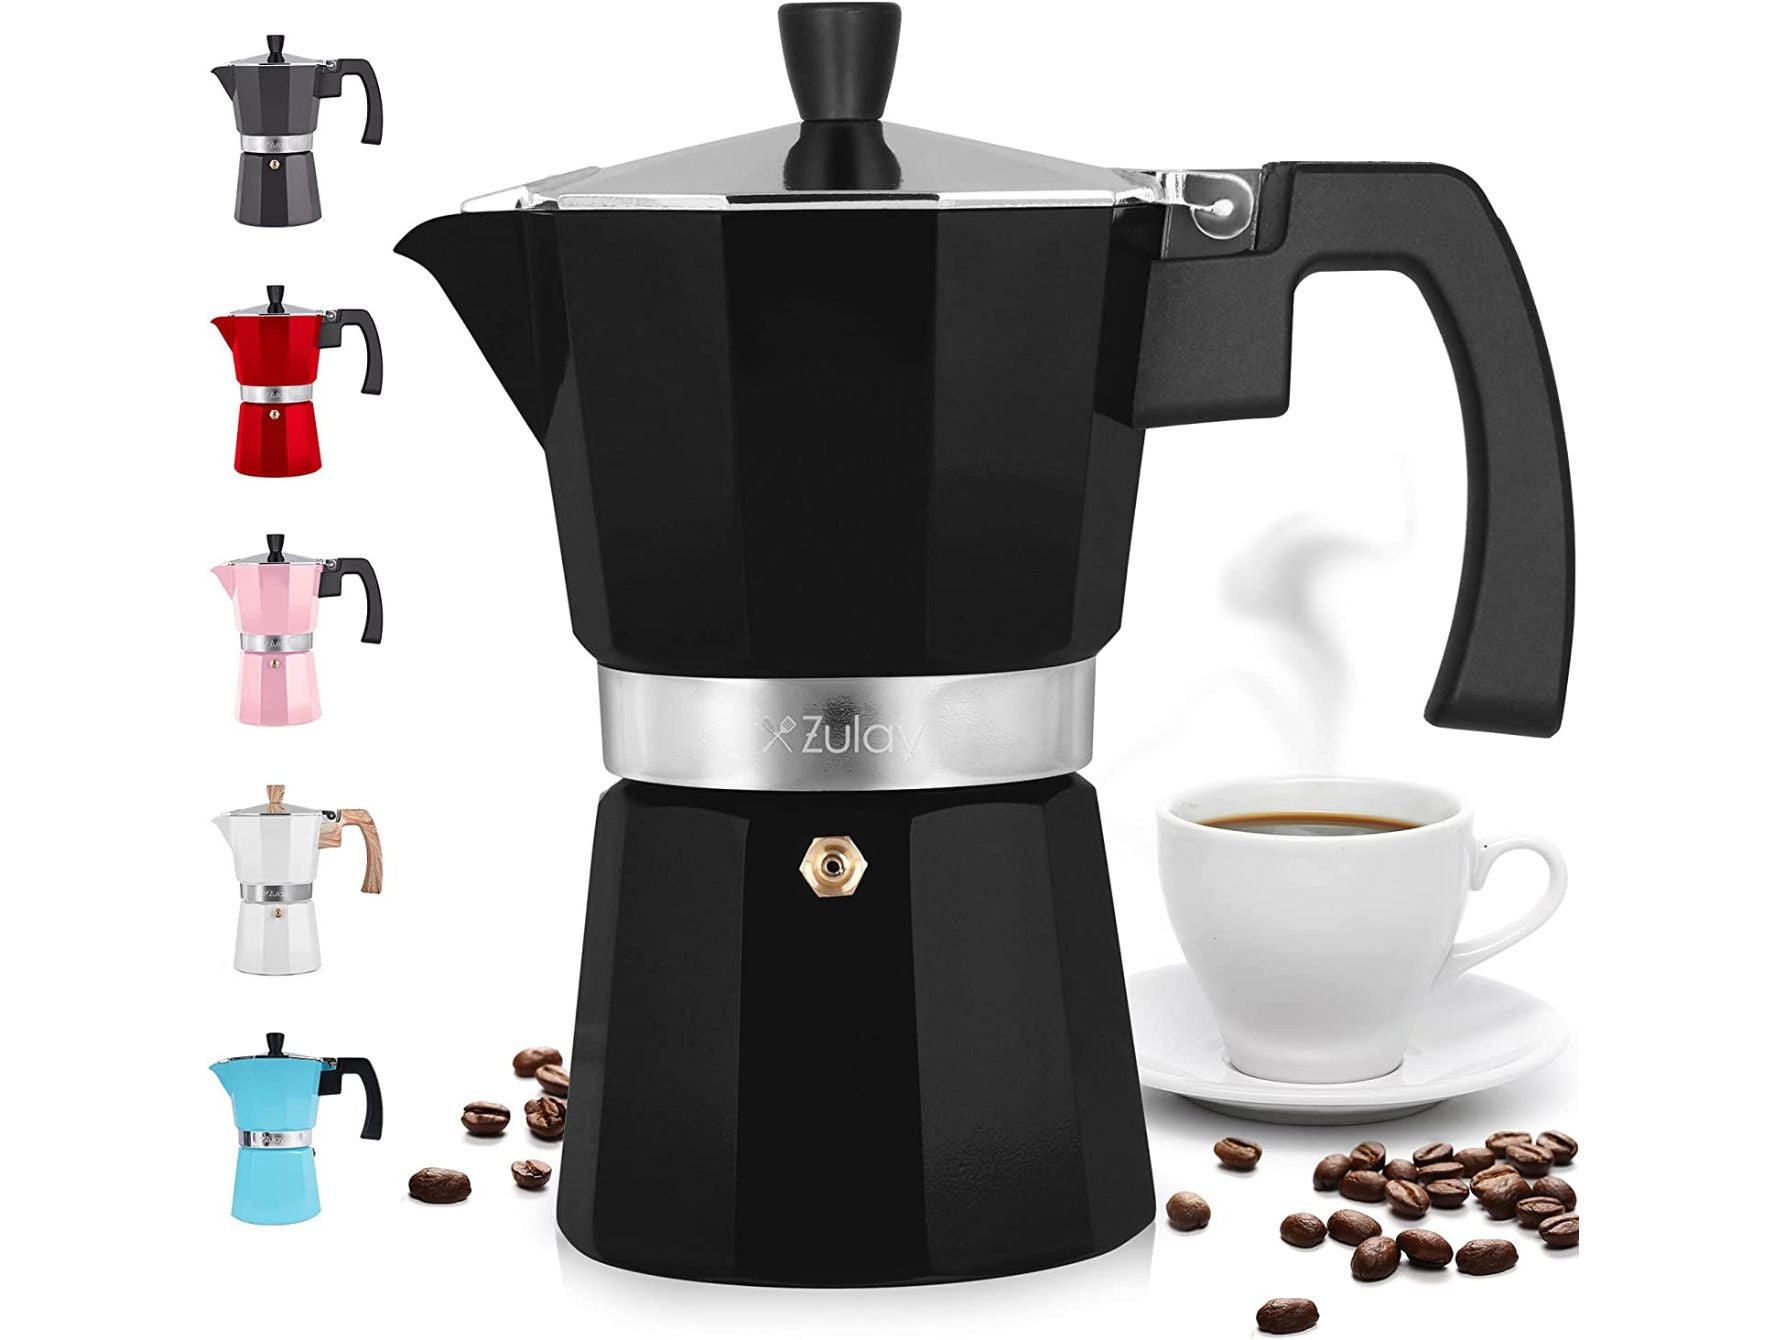 Different color variations of Zulay Kitchen Italian Style Espresso Maker